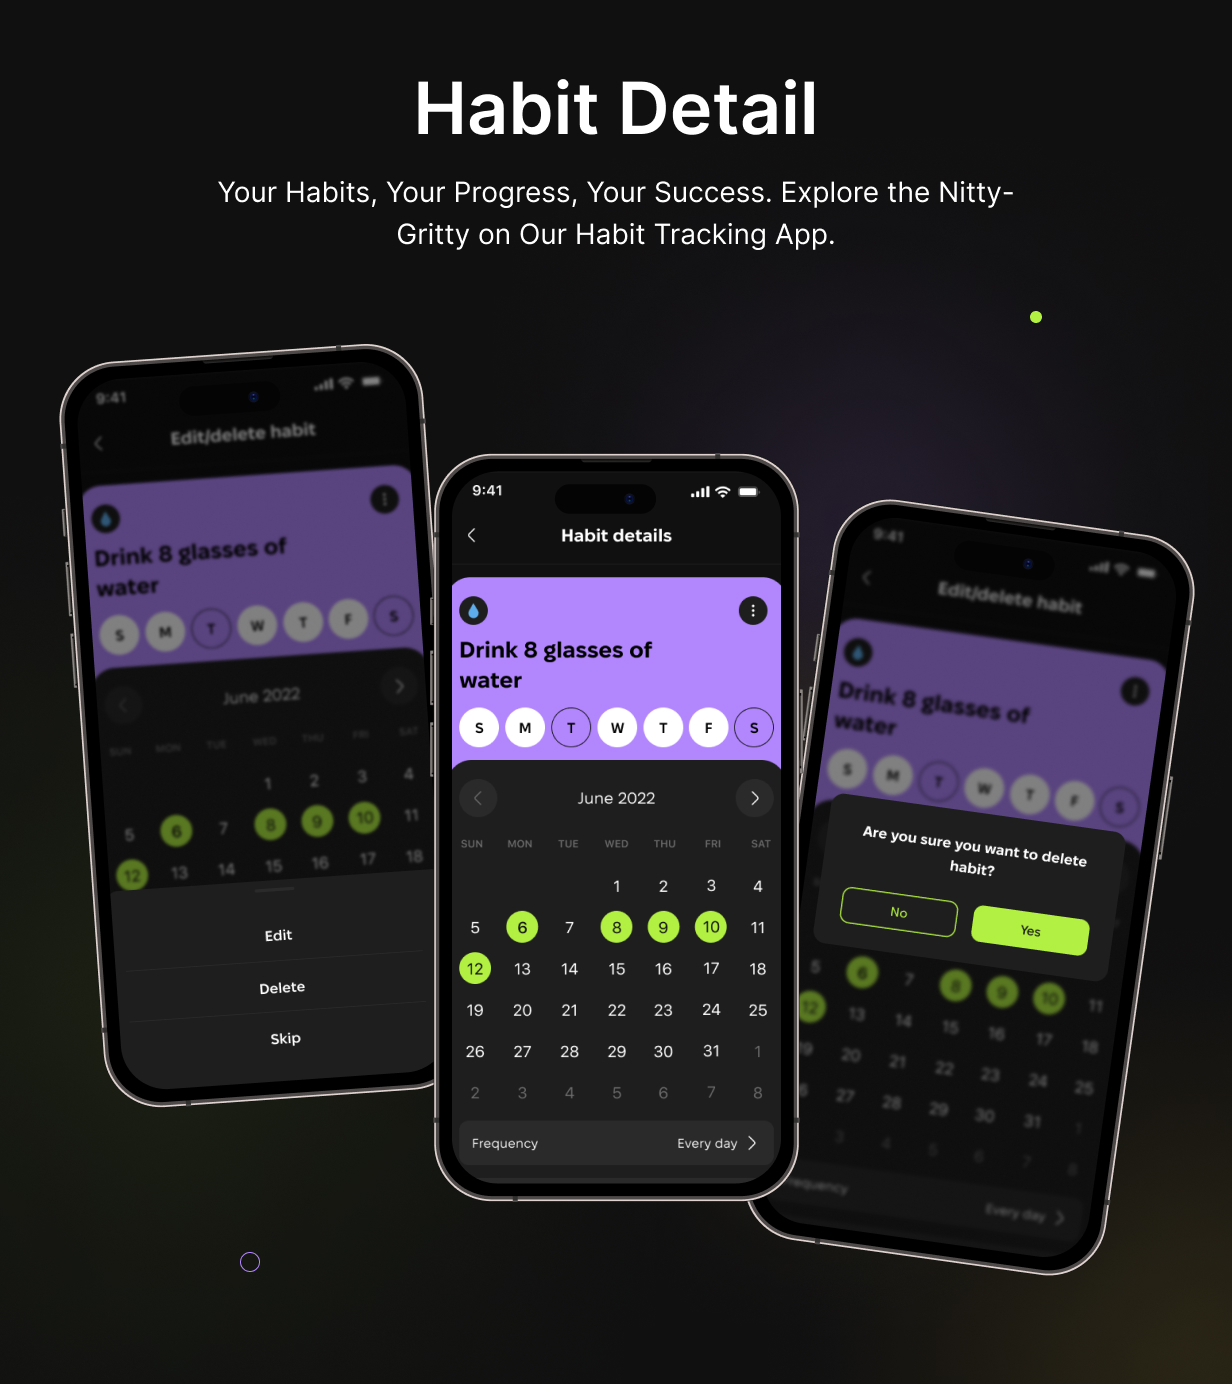 Habit Tracker Template: HabitNow Daily Routine Planner in Flutter(Android, iOS) App | HabitSync App - 8